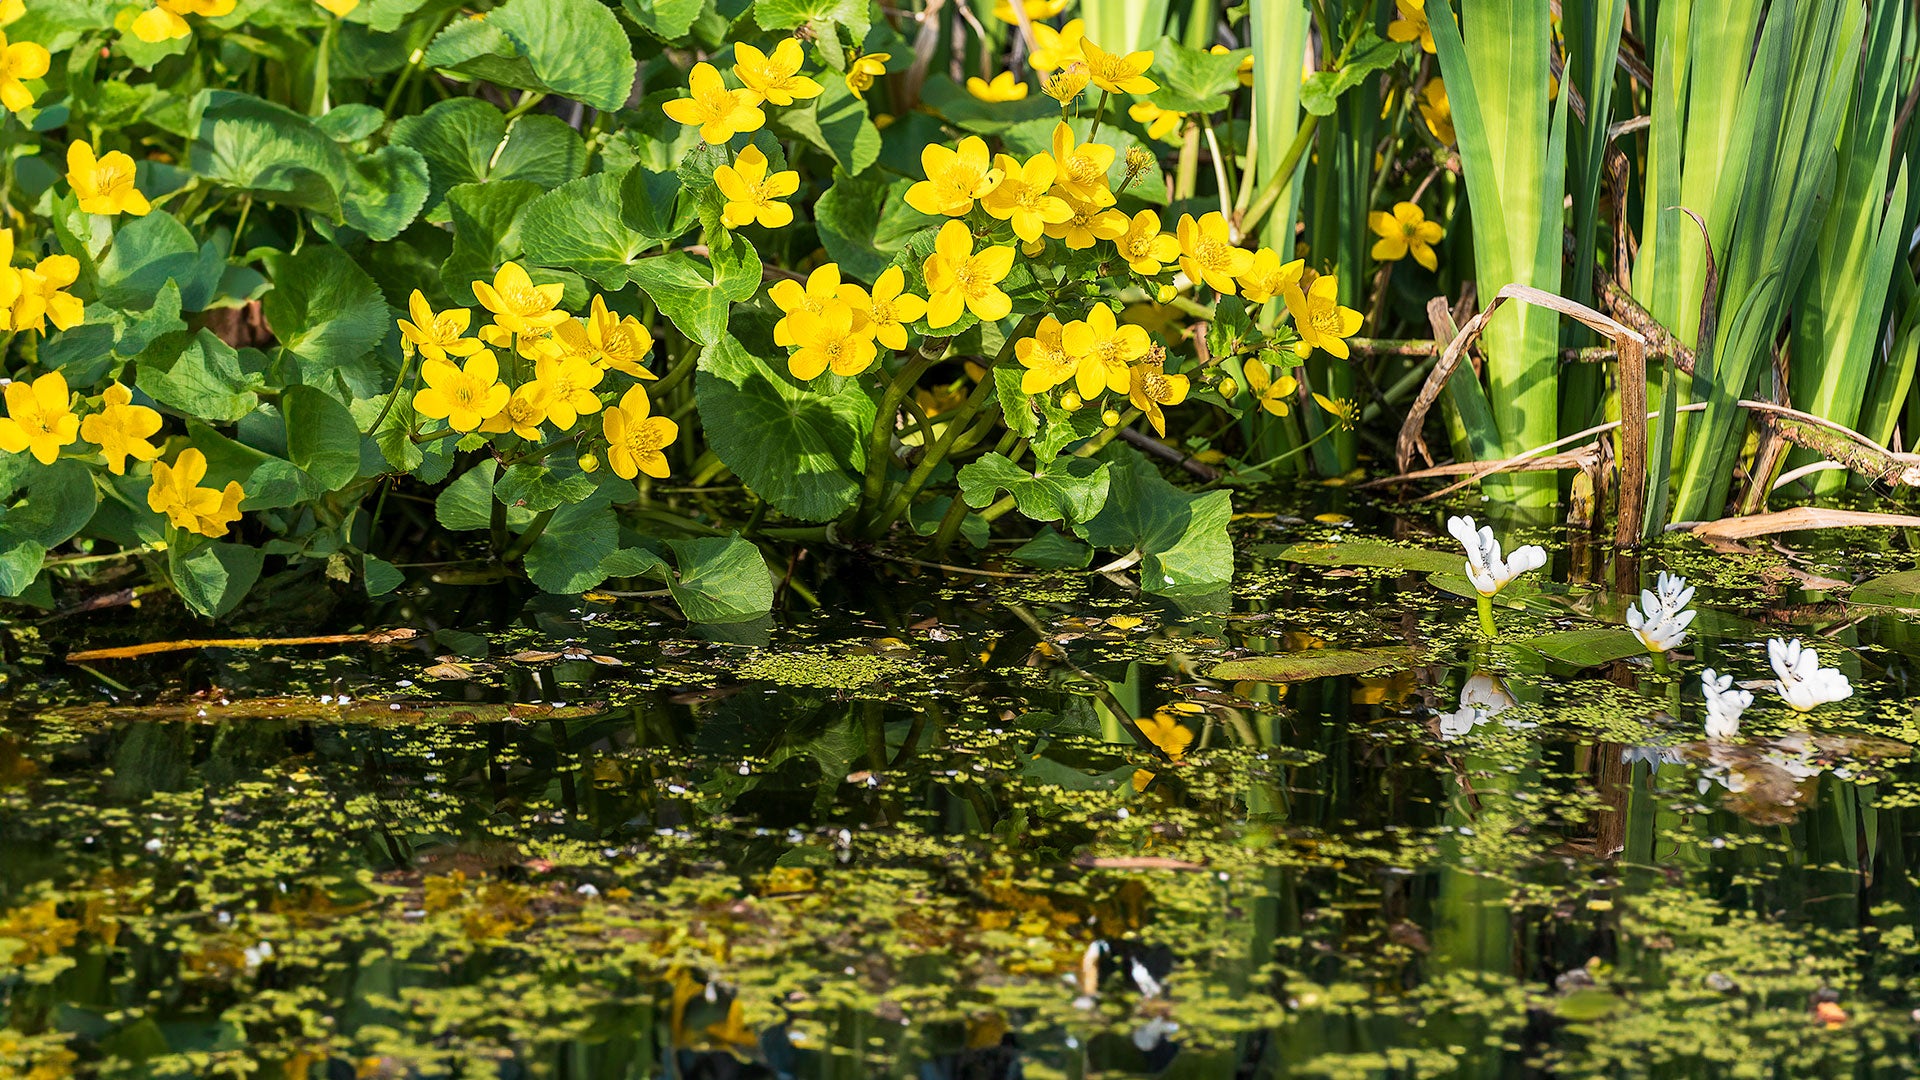 A wild pond with yellow flowers and lily pads